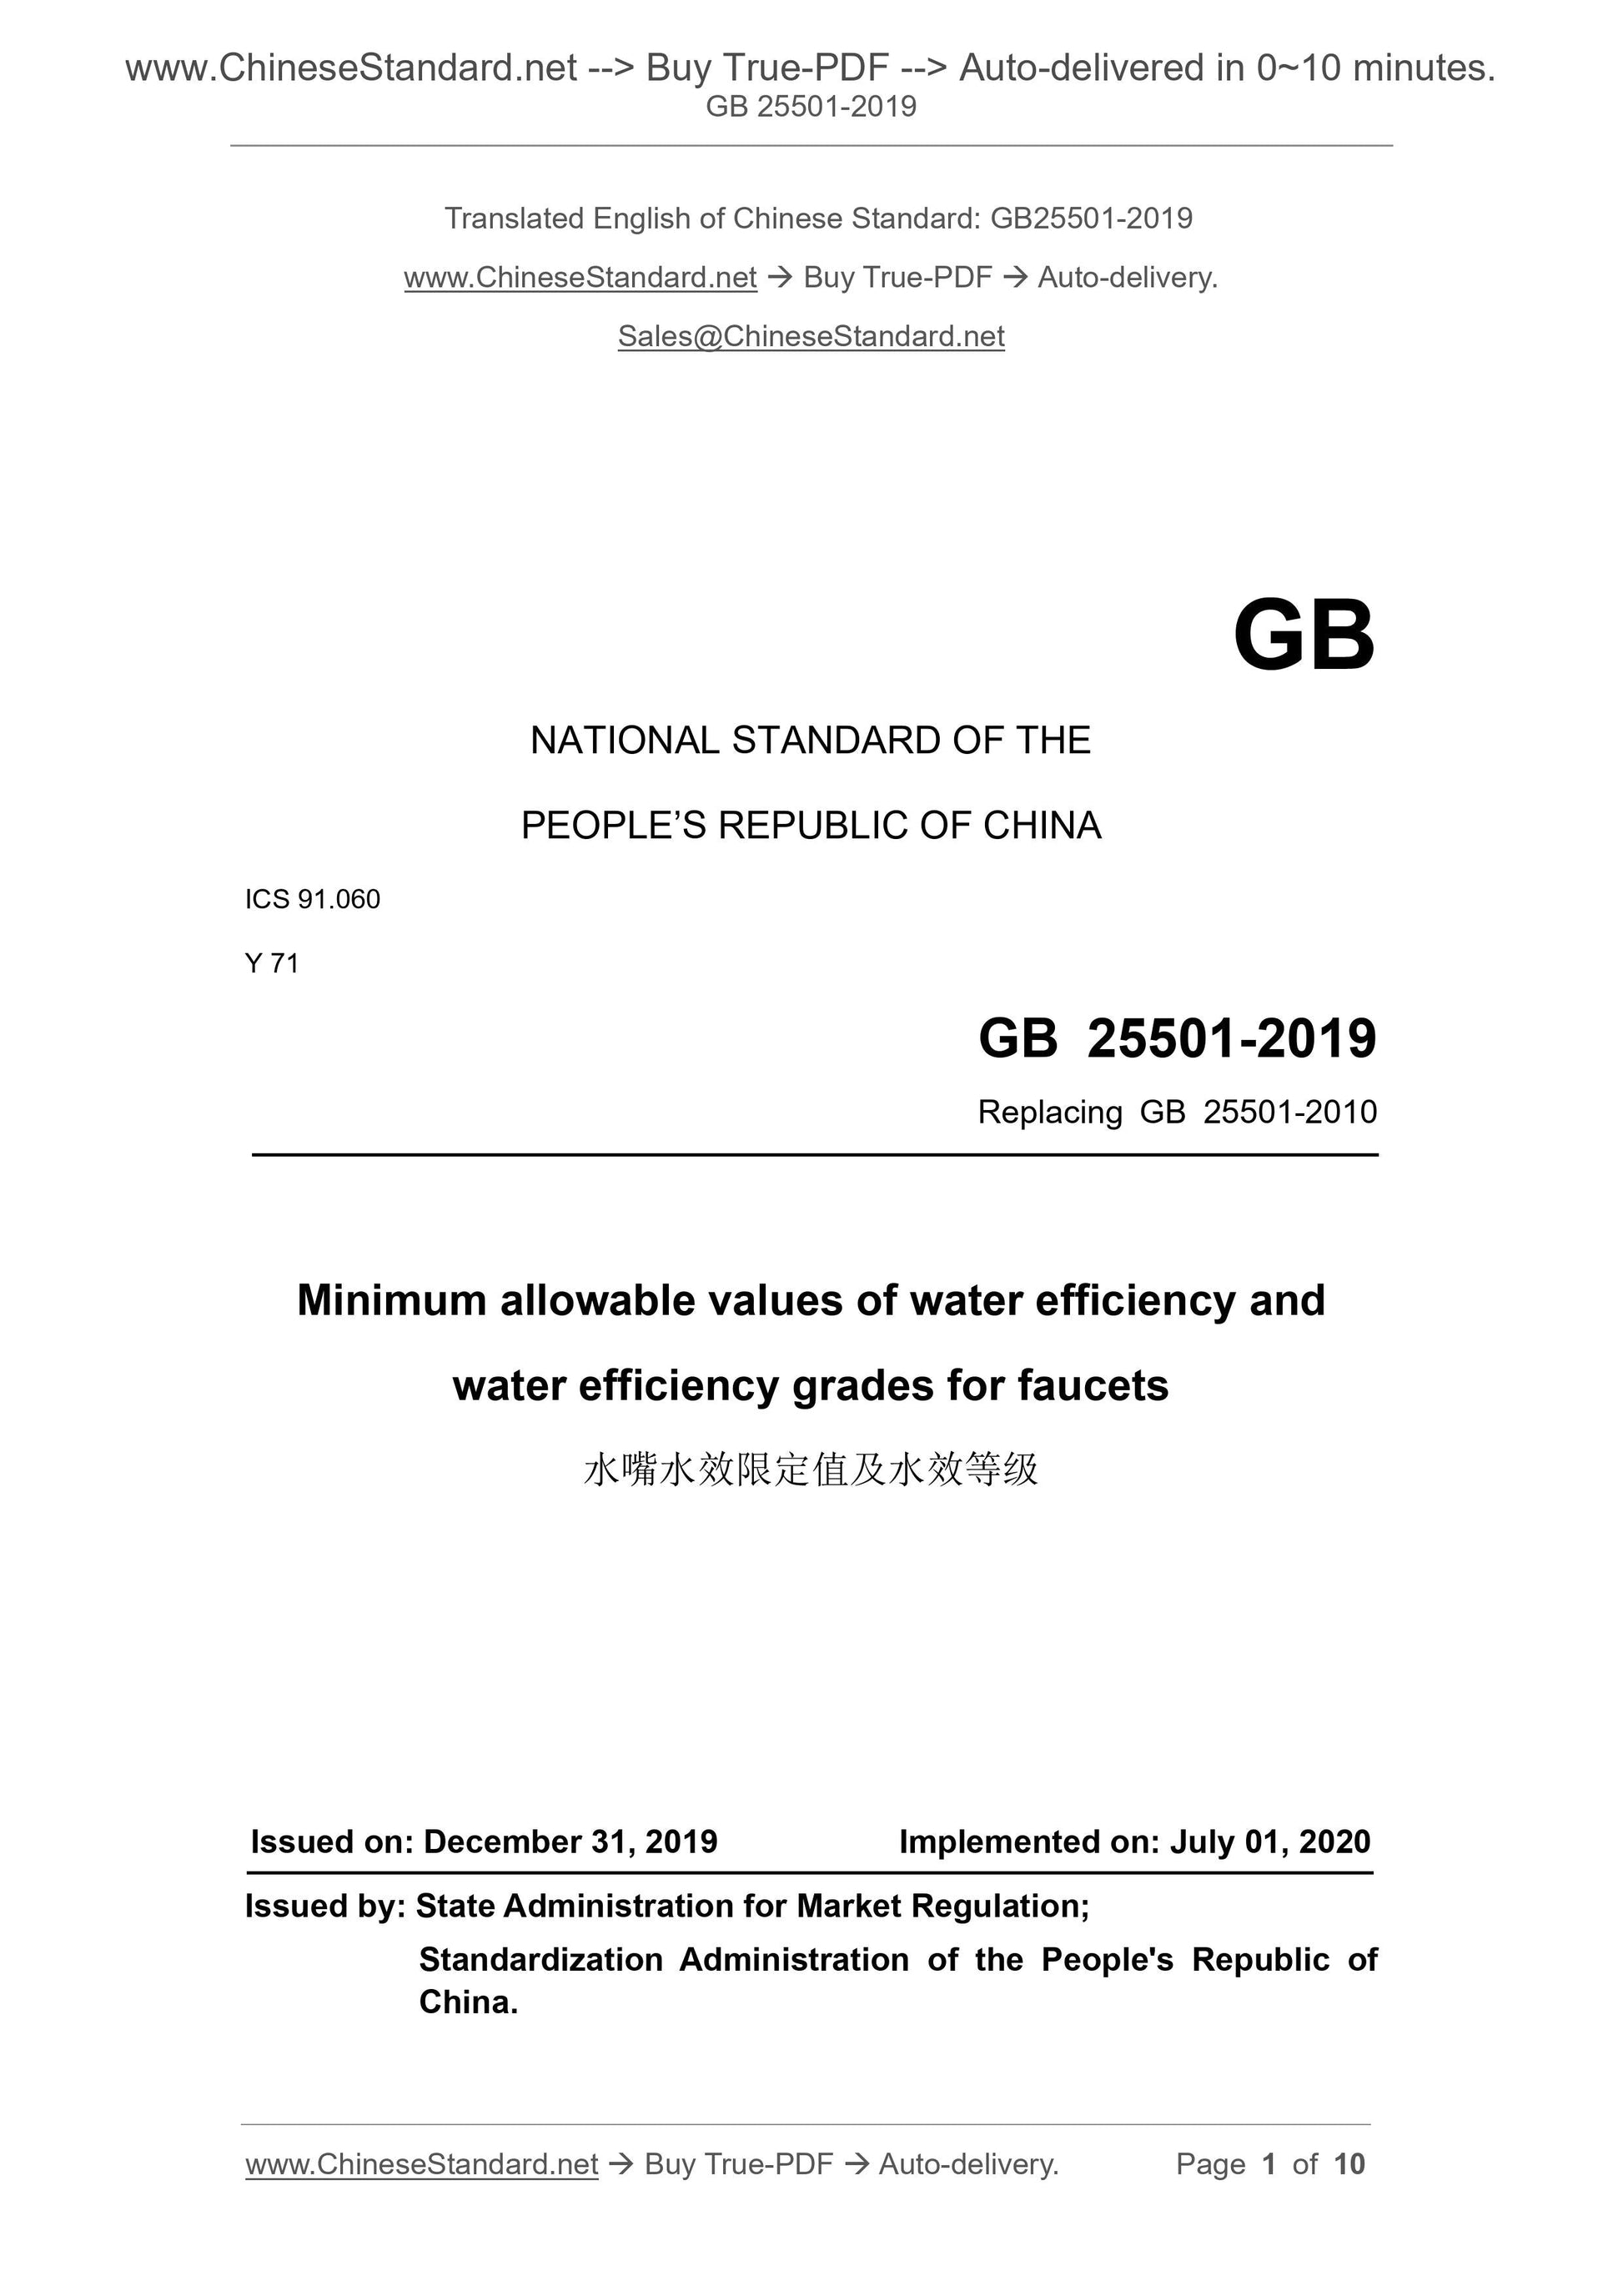 GB 25501-2019 Page 1